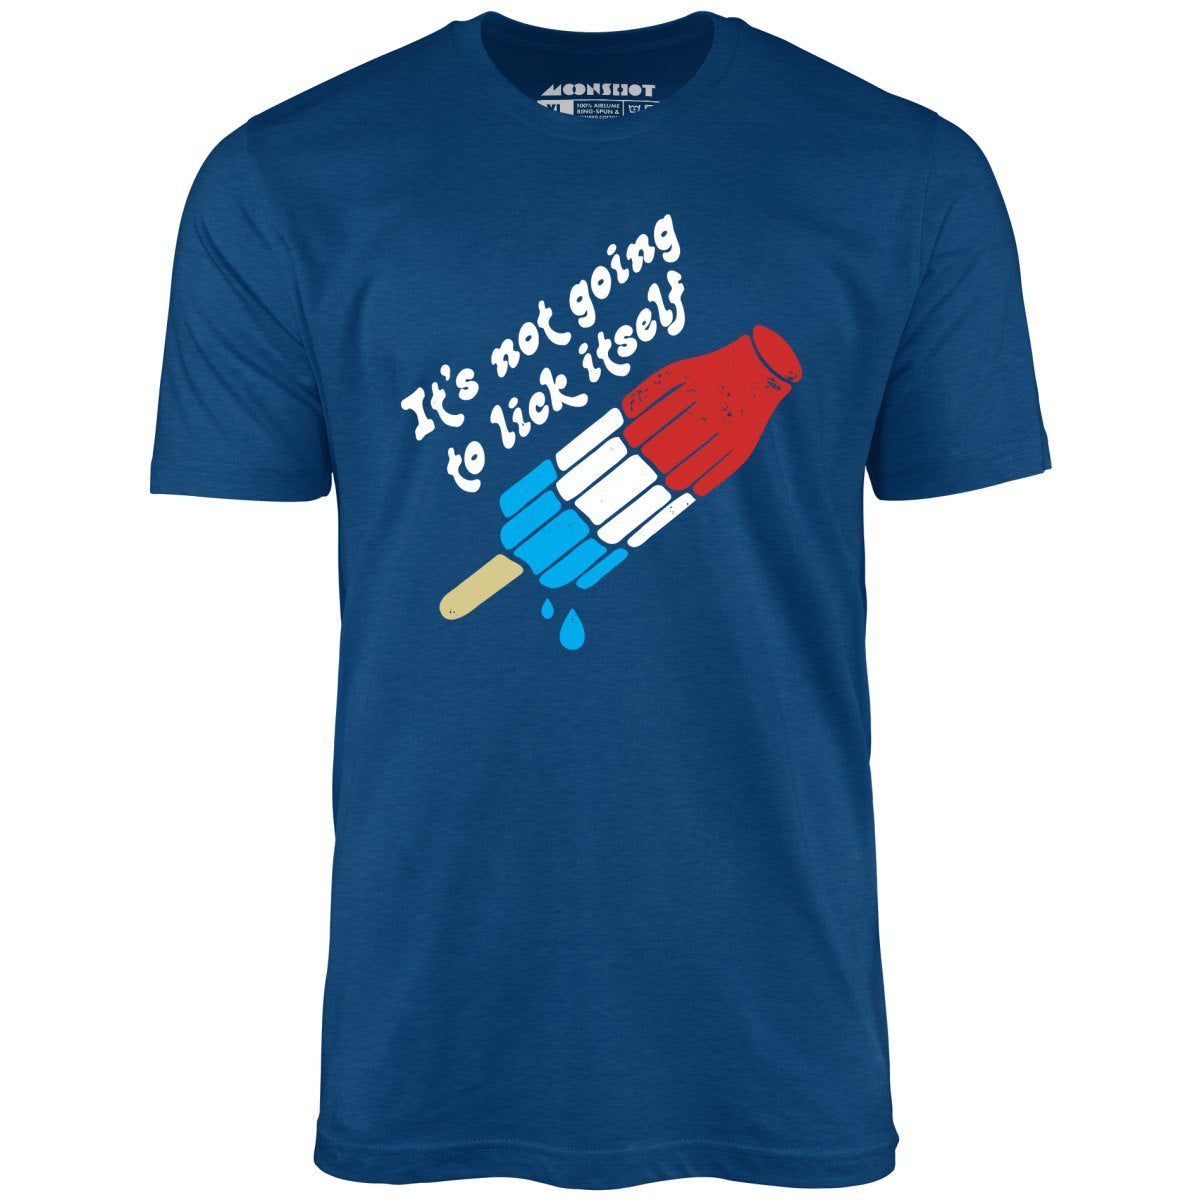 It's Not Going to Lick Itself - Unisex T-Shirt